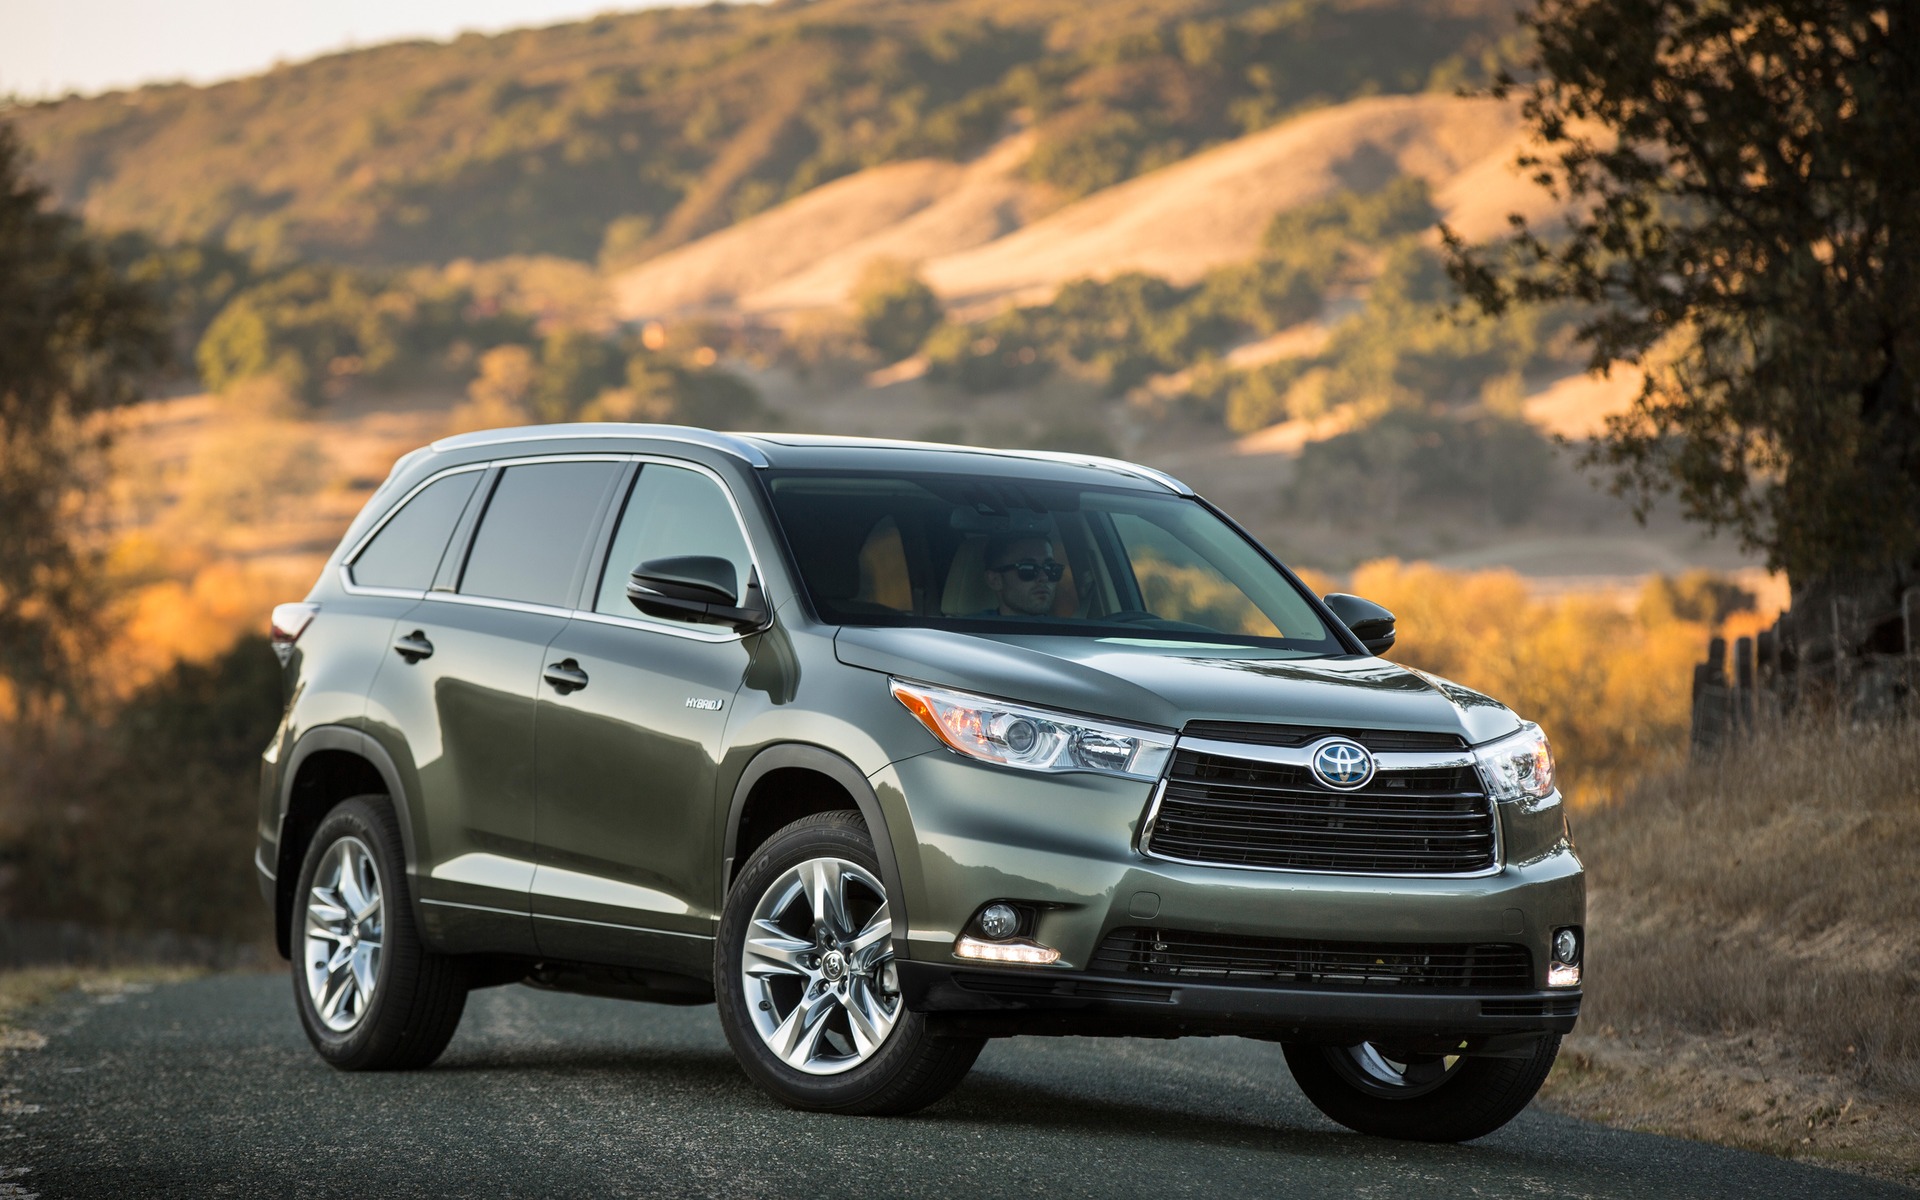 2016 Toyota Highlander Le Specifications The Car Guide